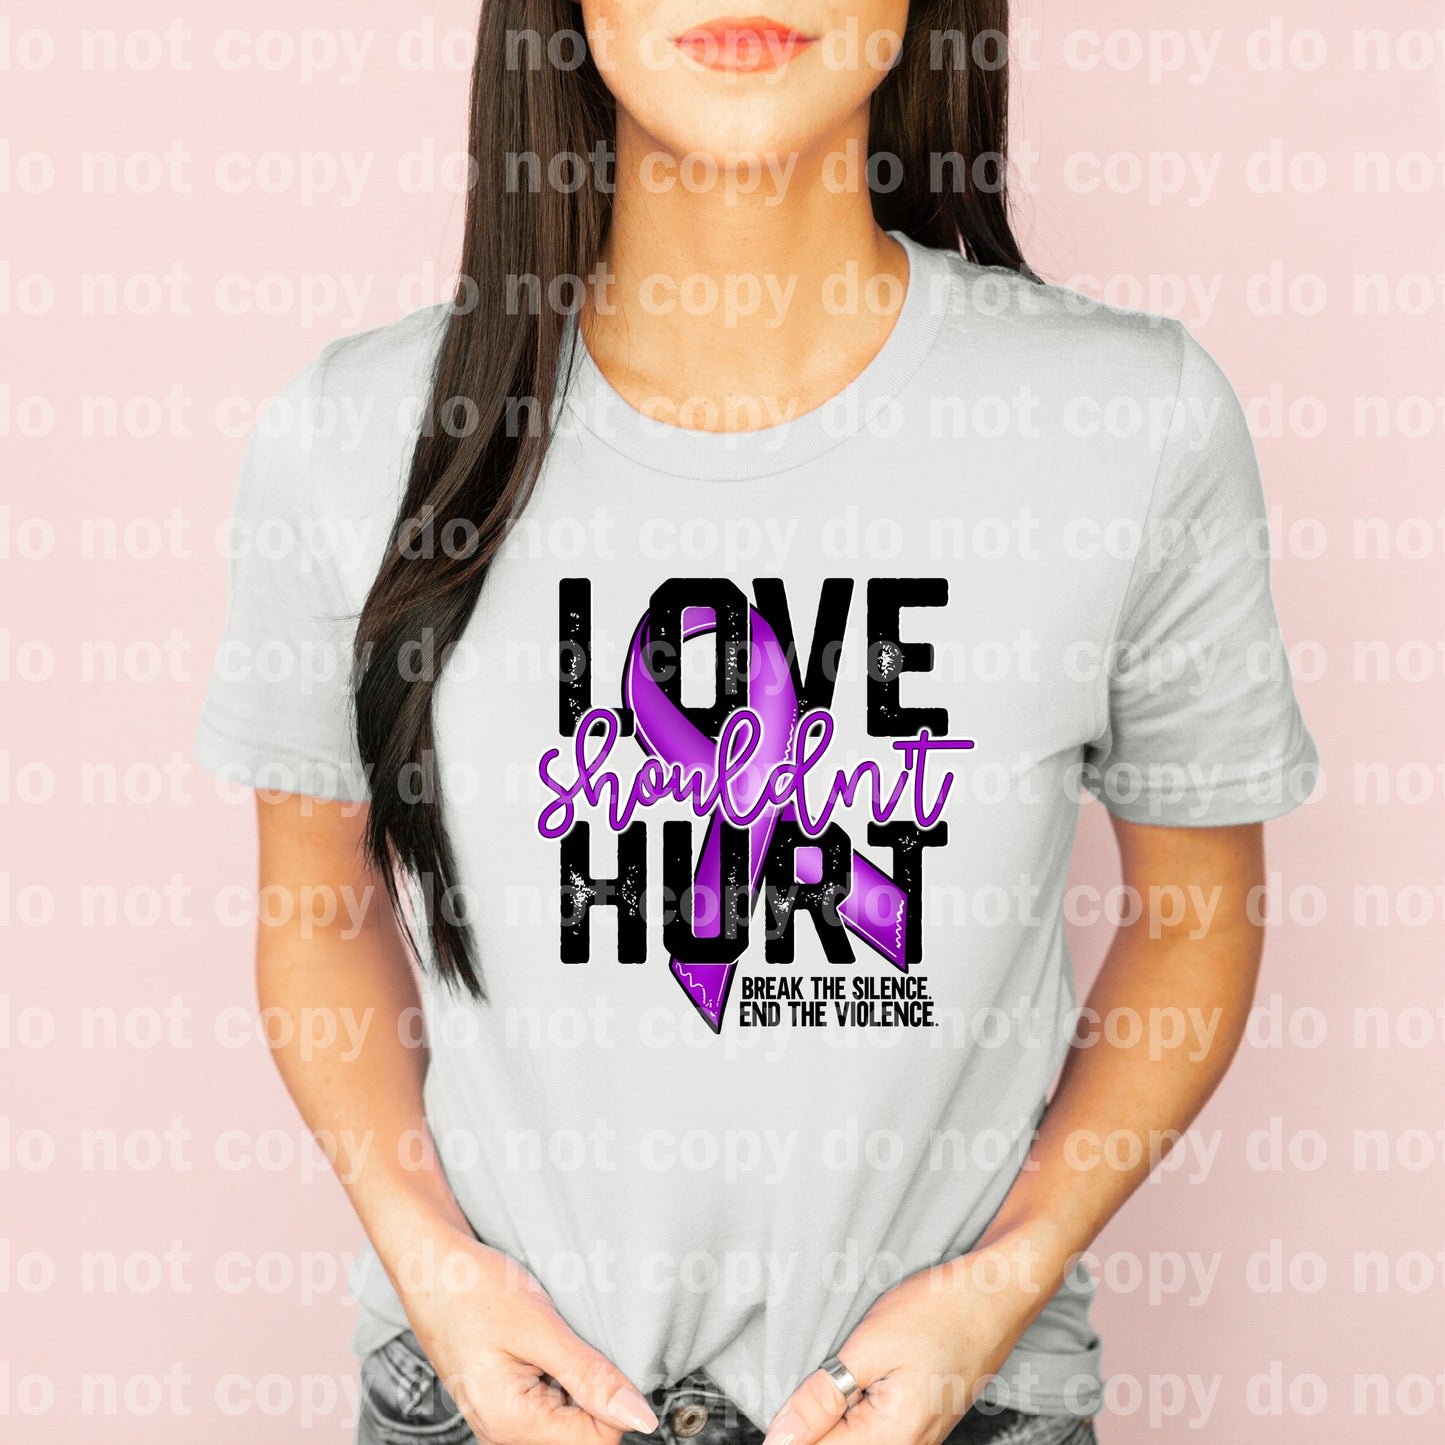 Love Shouldn't Hurt Break The Silence End The Violence Dream Print or Sublimation Print